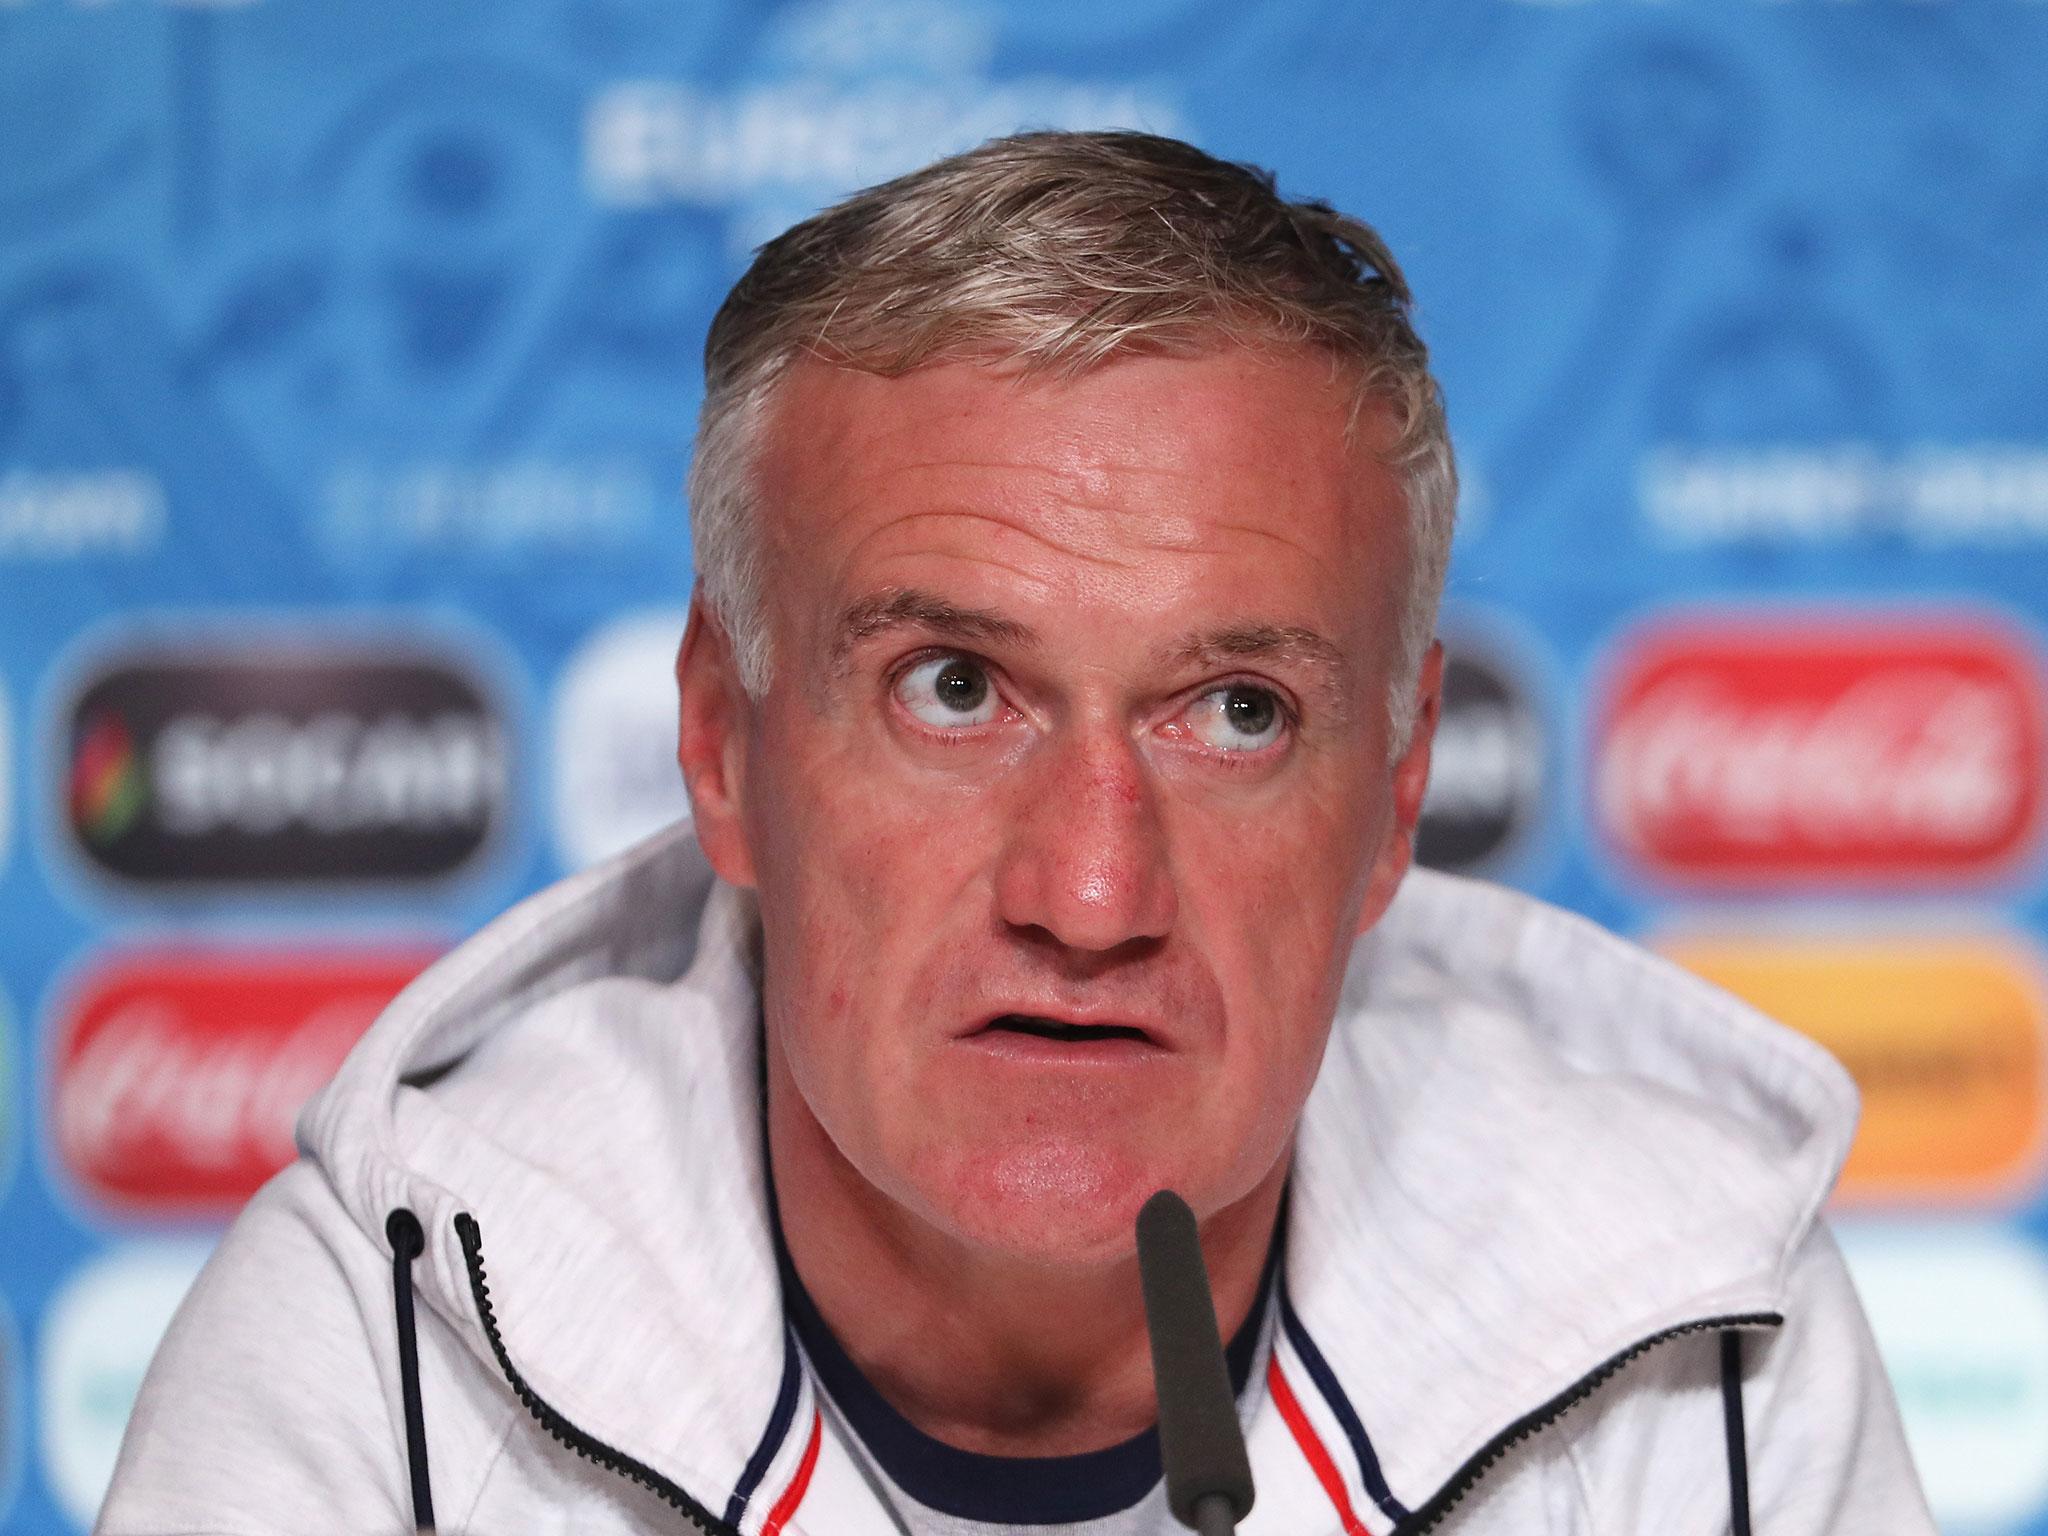 France manager Didier Deschamps faces the media ahead of the Euro 2016 opener against Romania